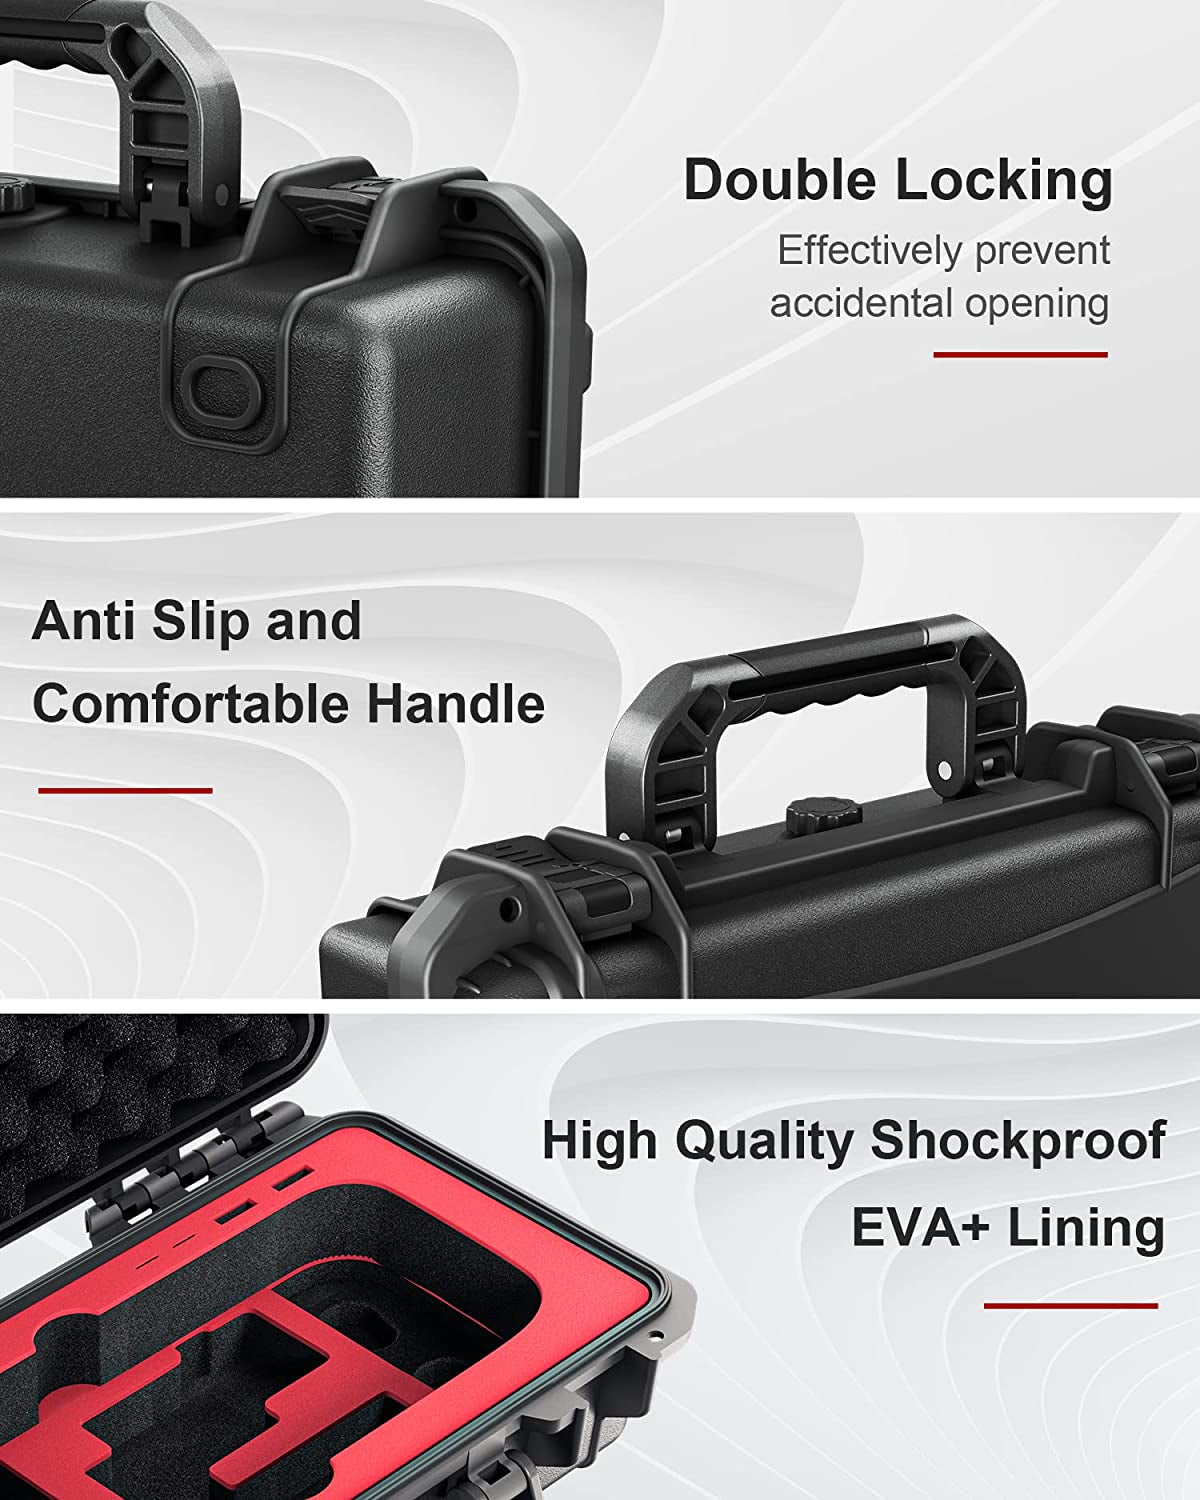 Travel Carrying Case for Steam Deck, Professional Deluxe Waterproof Case Soft Lining Hard Travel Case for Steam Deck and Other Accessories